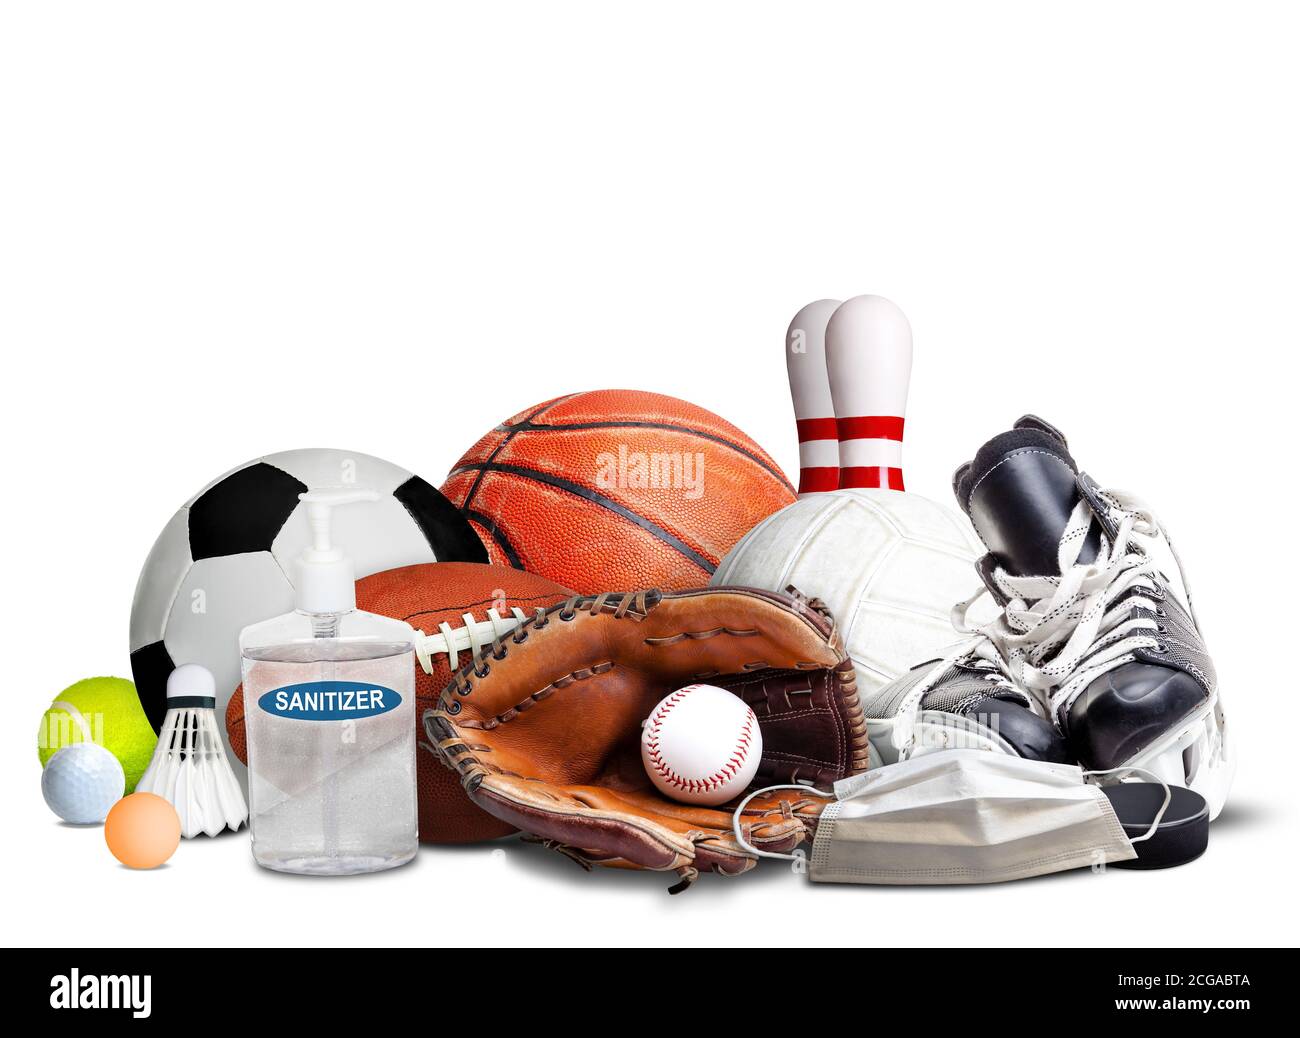 COVID-19 coronavirus new normal and sports concept showing sports equipment, rackets and balls with hand sanitizer and face mask isolated on white bac Stock Photo